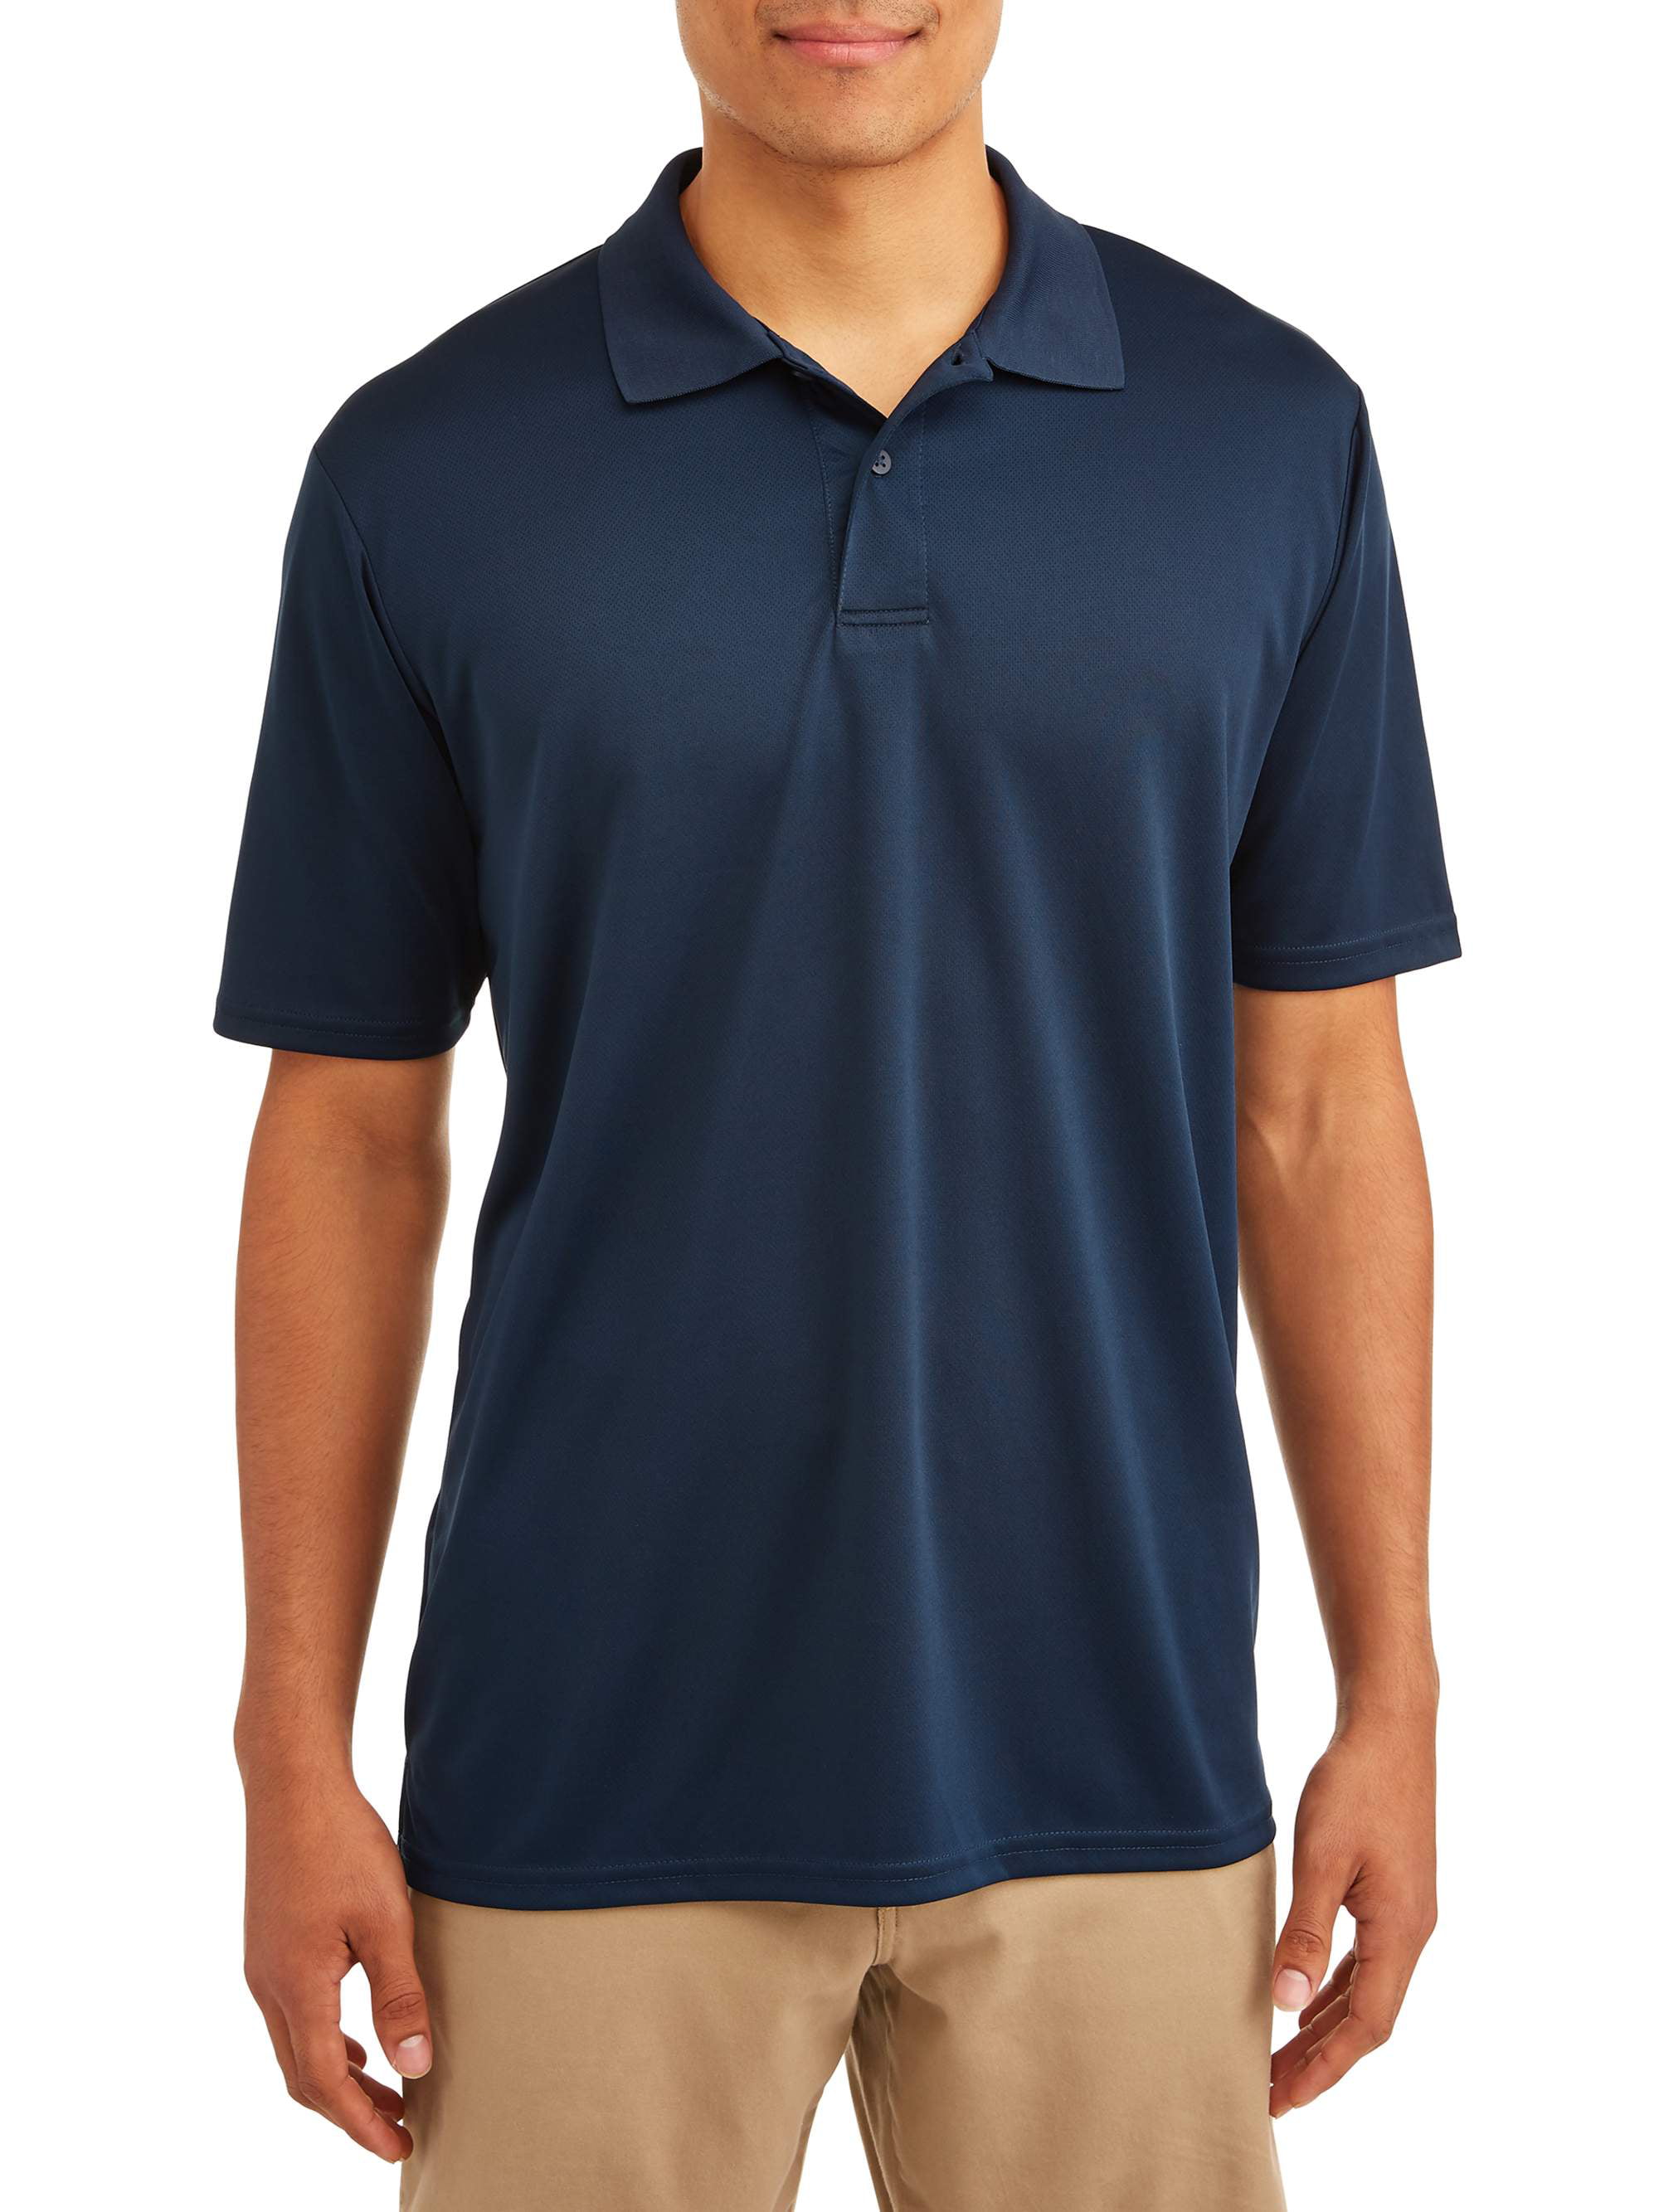 Polo T Shirt with Short Sleeves Short Sleeve Polo Shirt with Sun Protection Men Under Armour Performance 2.0 